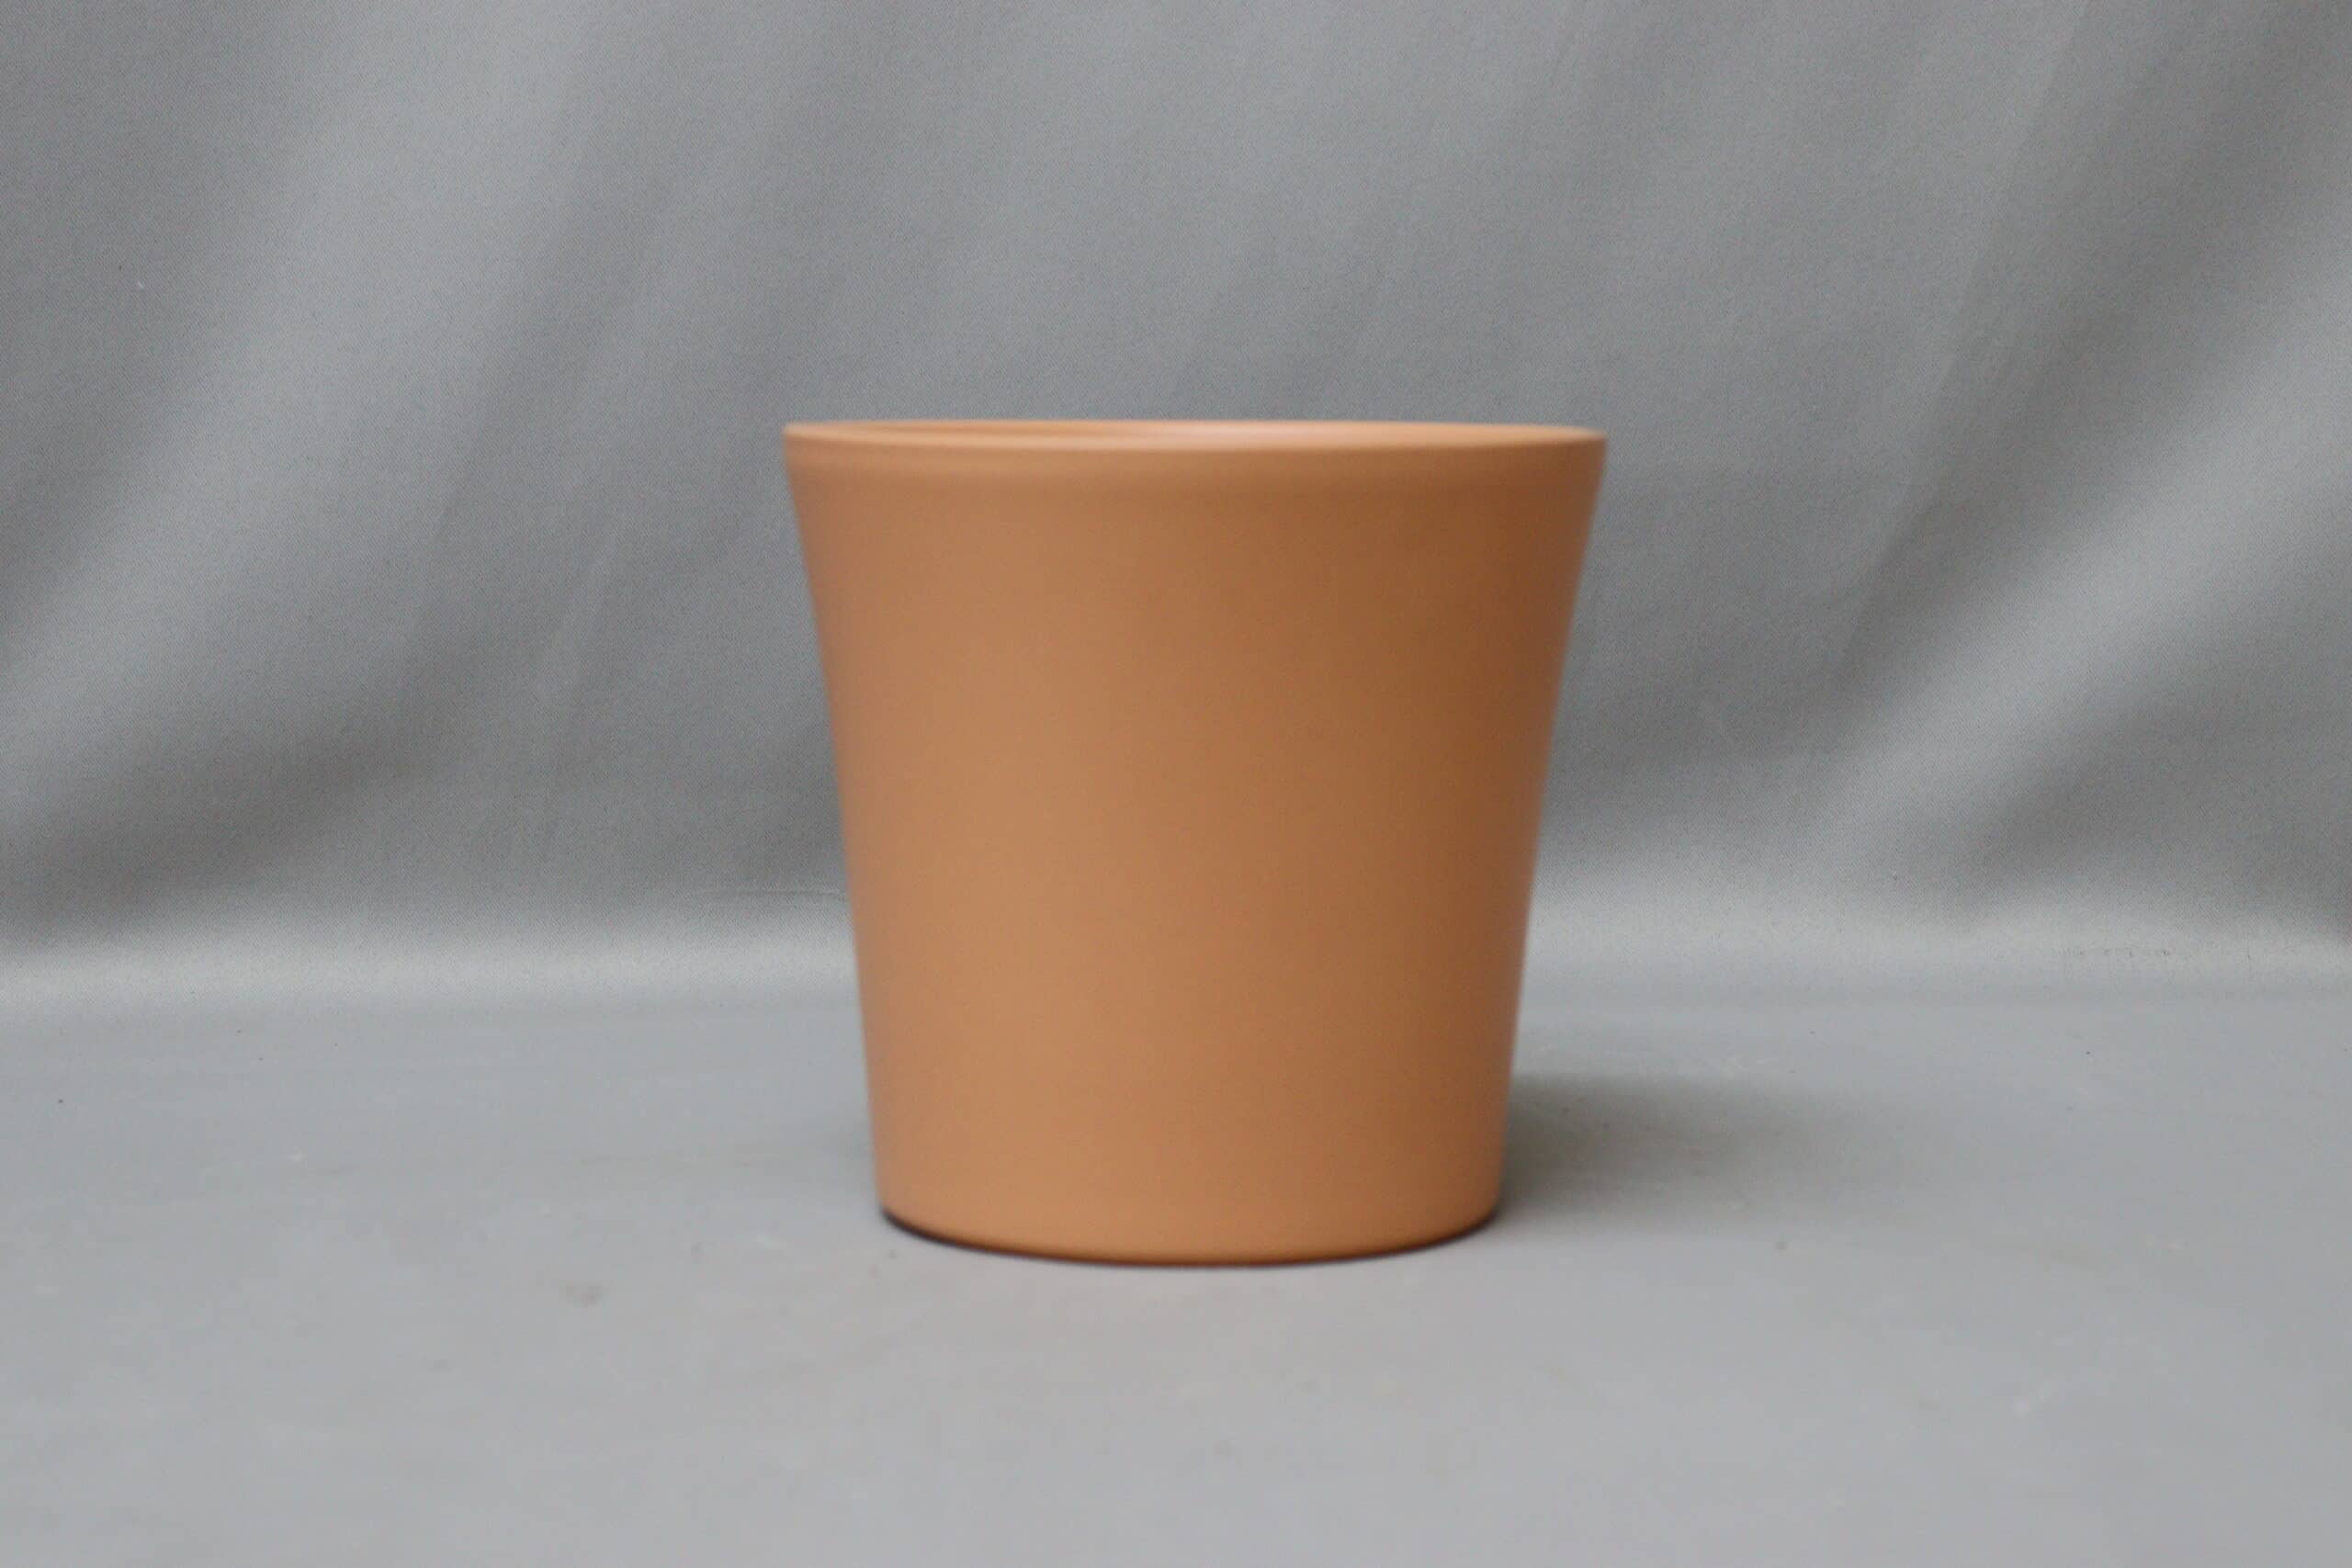 Terracotta-coloured pot cover for potted plants.